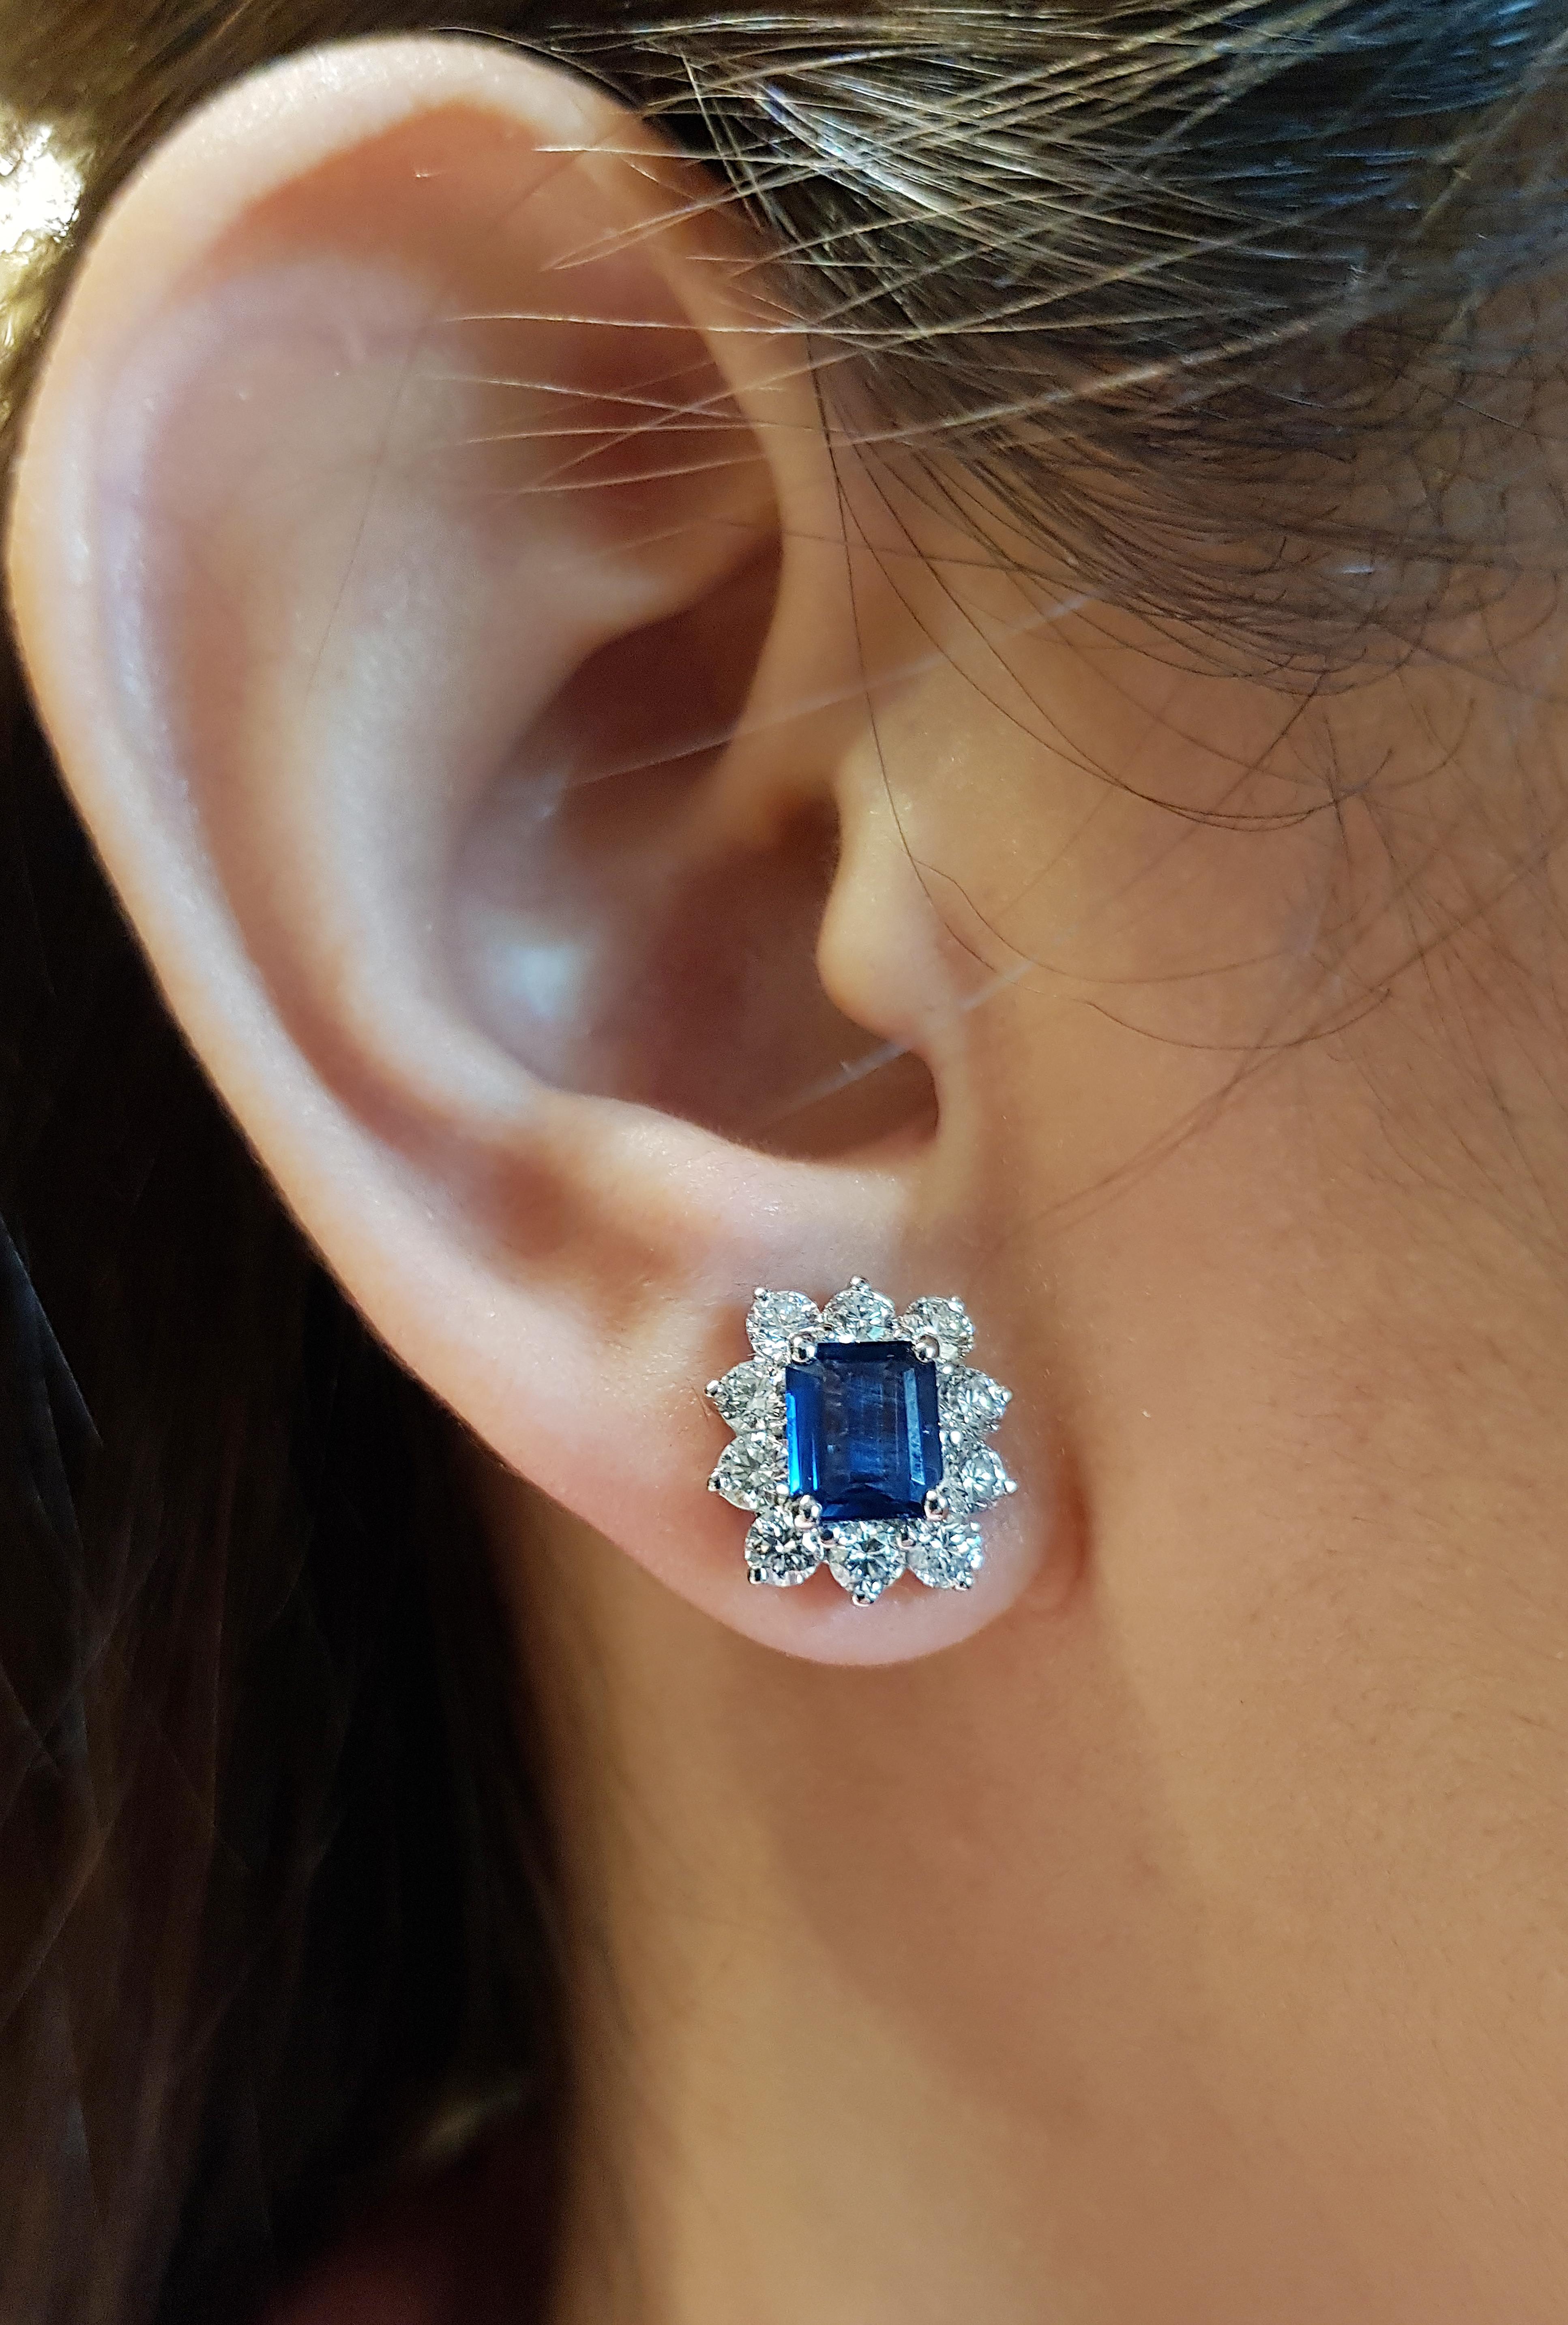 Blue Sapphire 2.13 carats with Diamond 1.62 carats Earrings set in 18 Karat White Gold Settings

Width:  1.1 cm 
Length: 1.1 cm
Total Weight: 4.75 grams

